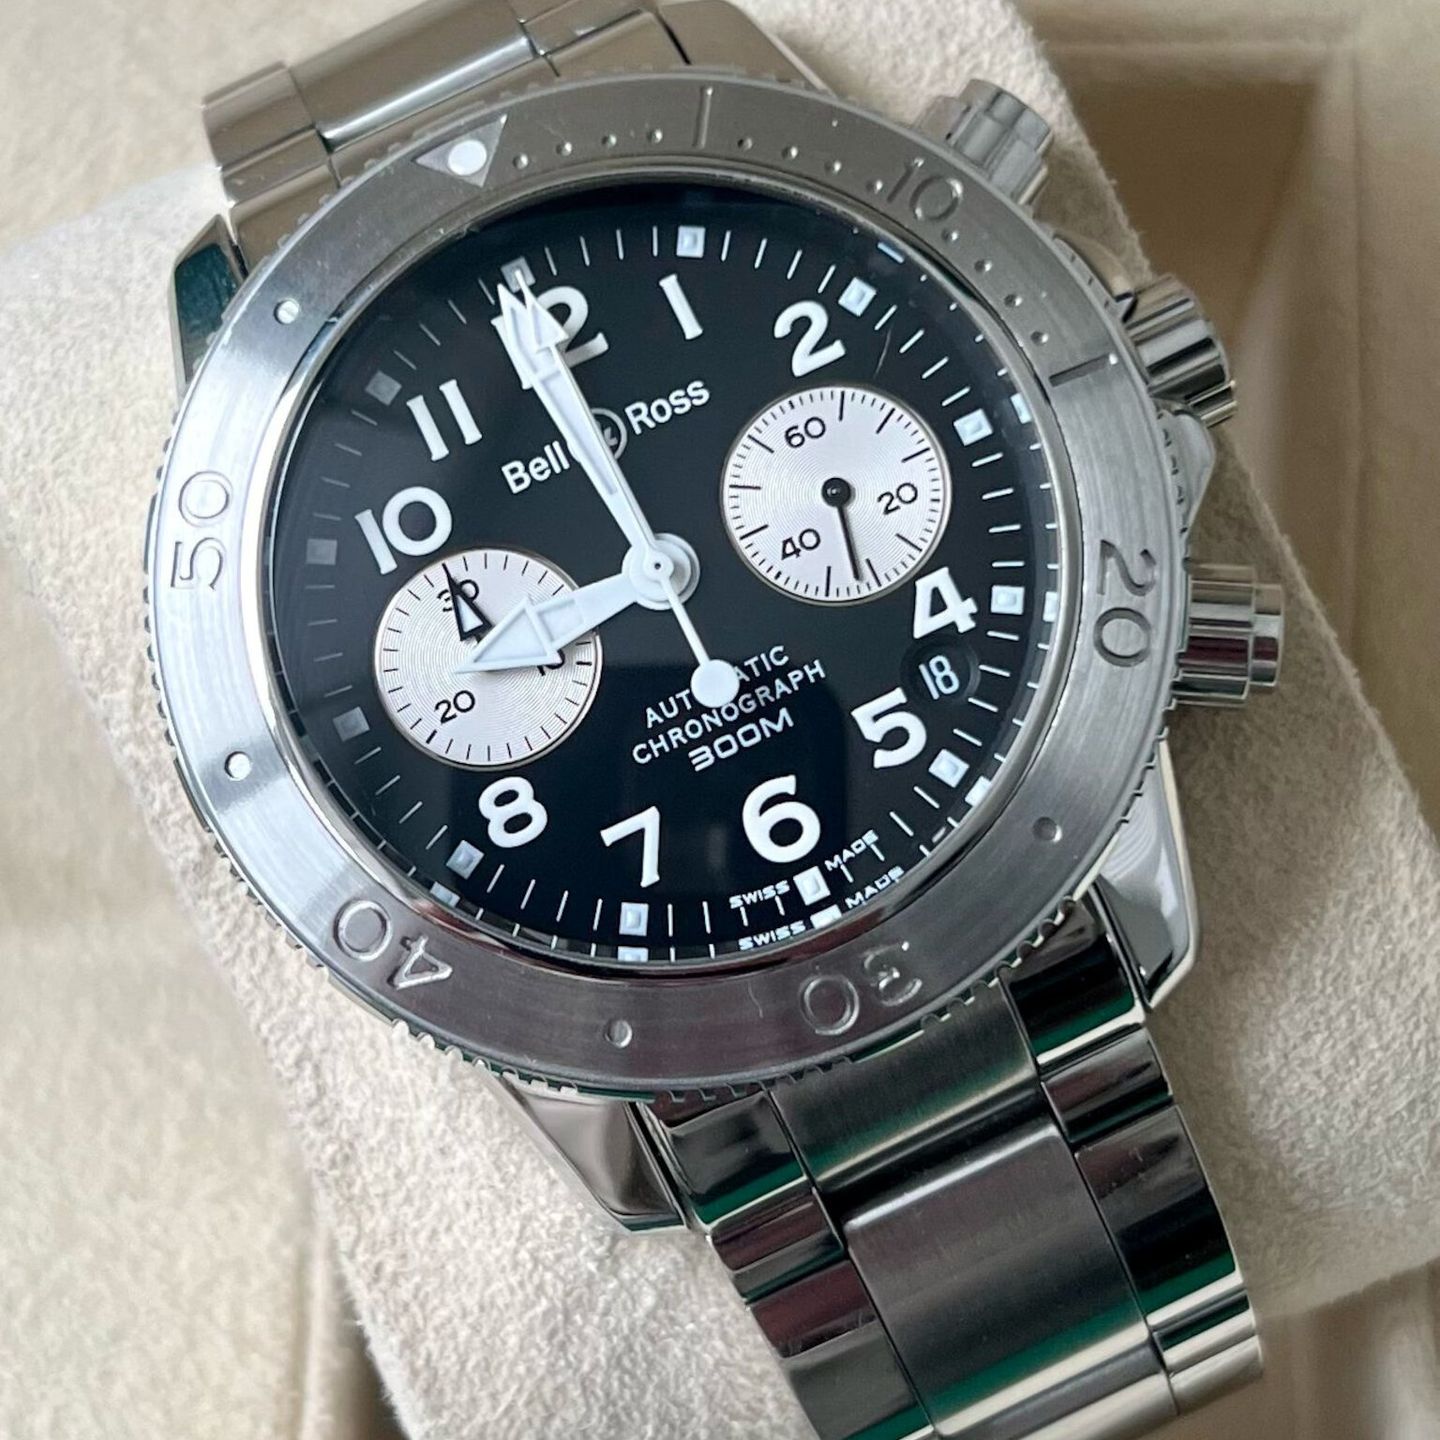 Bell & Ross Diver 300 Unknown - (1/5)